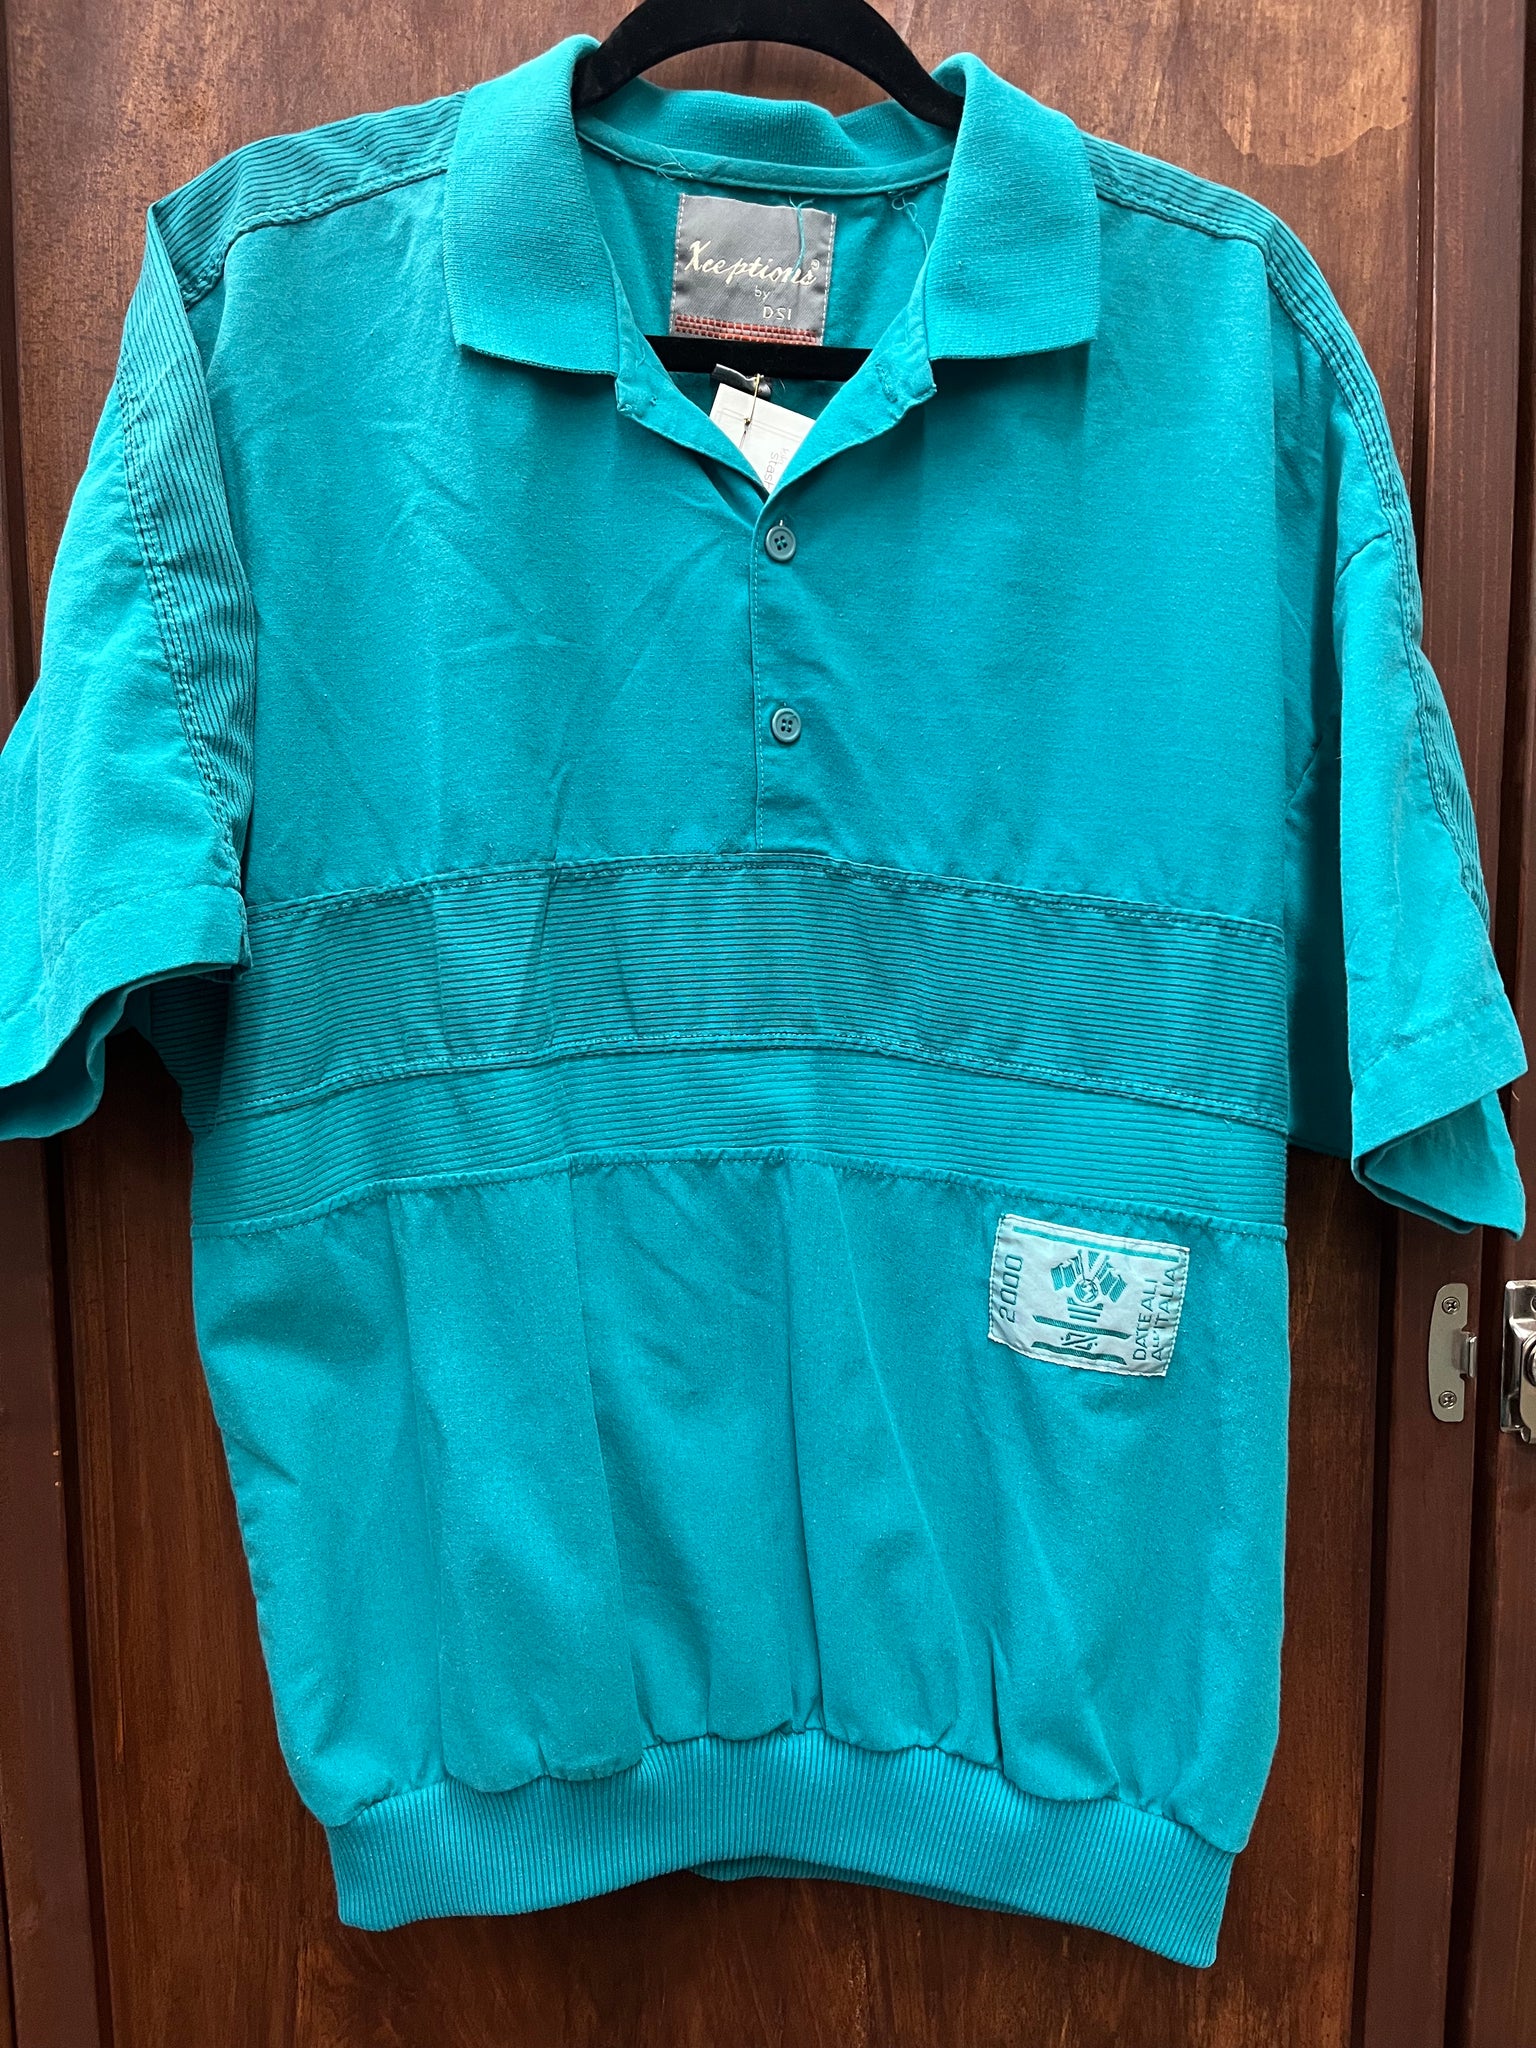 1990s MENS TOP- Keeptions teal banded polo